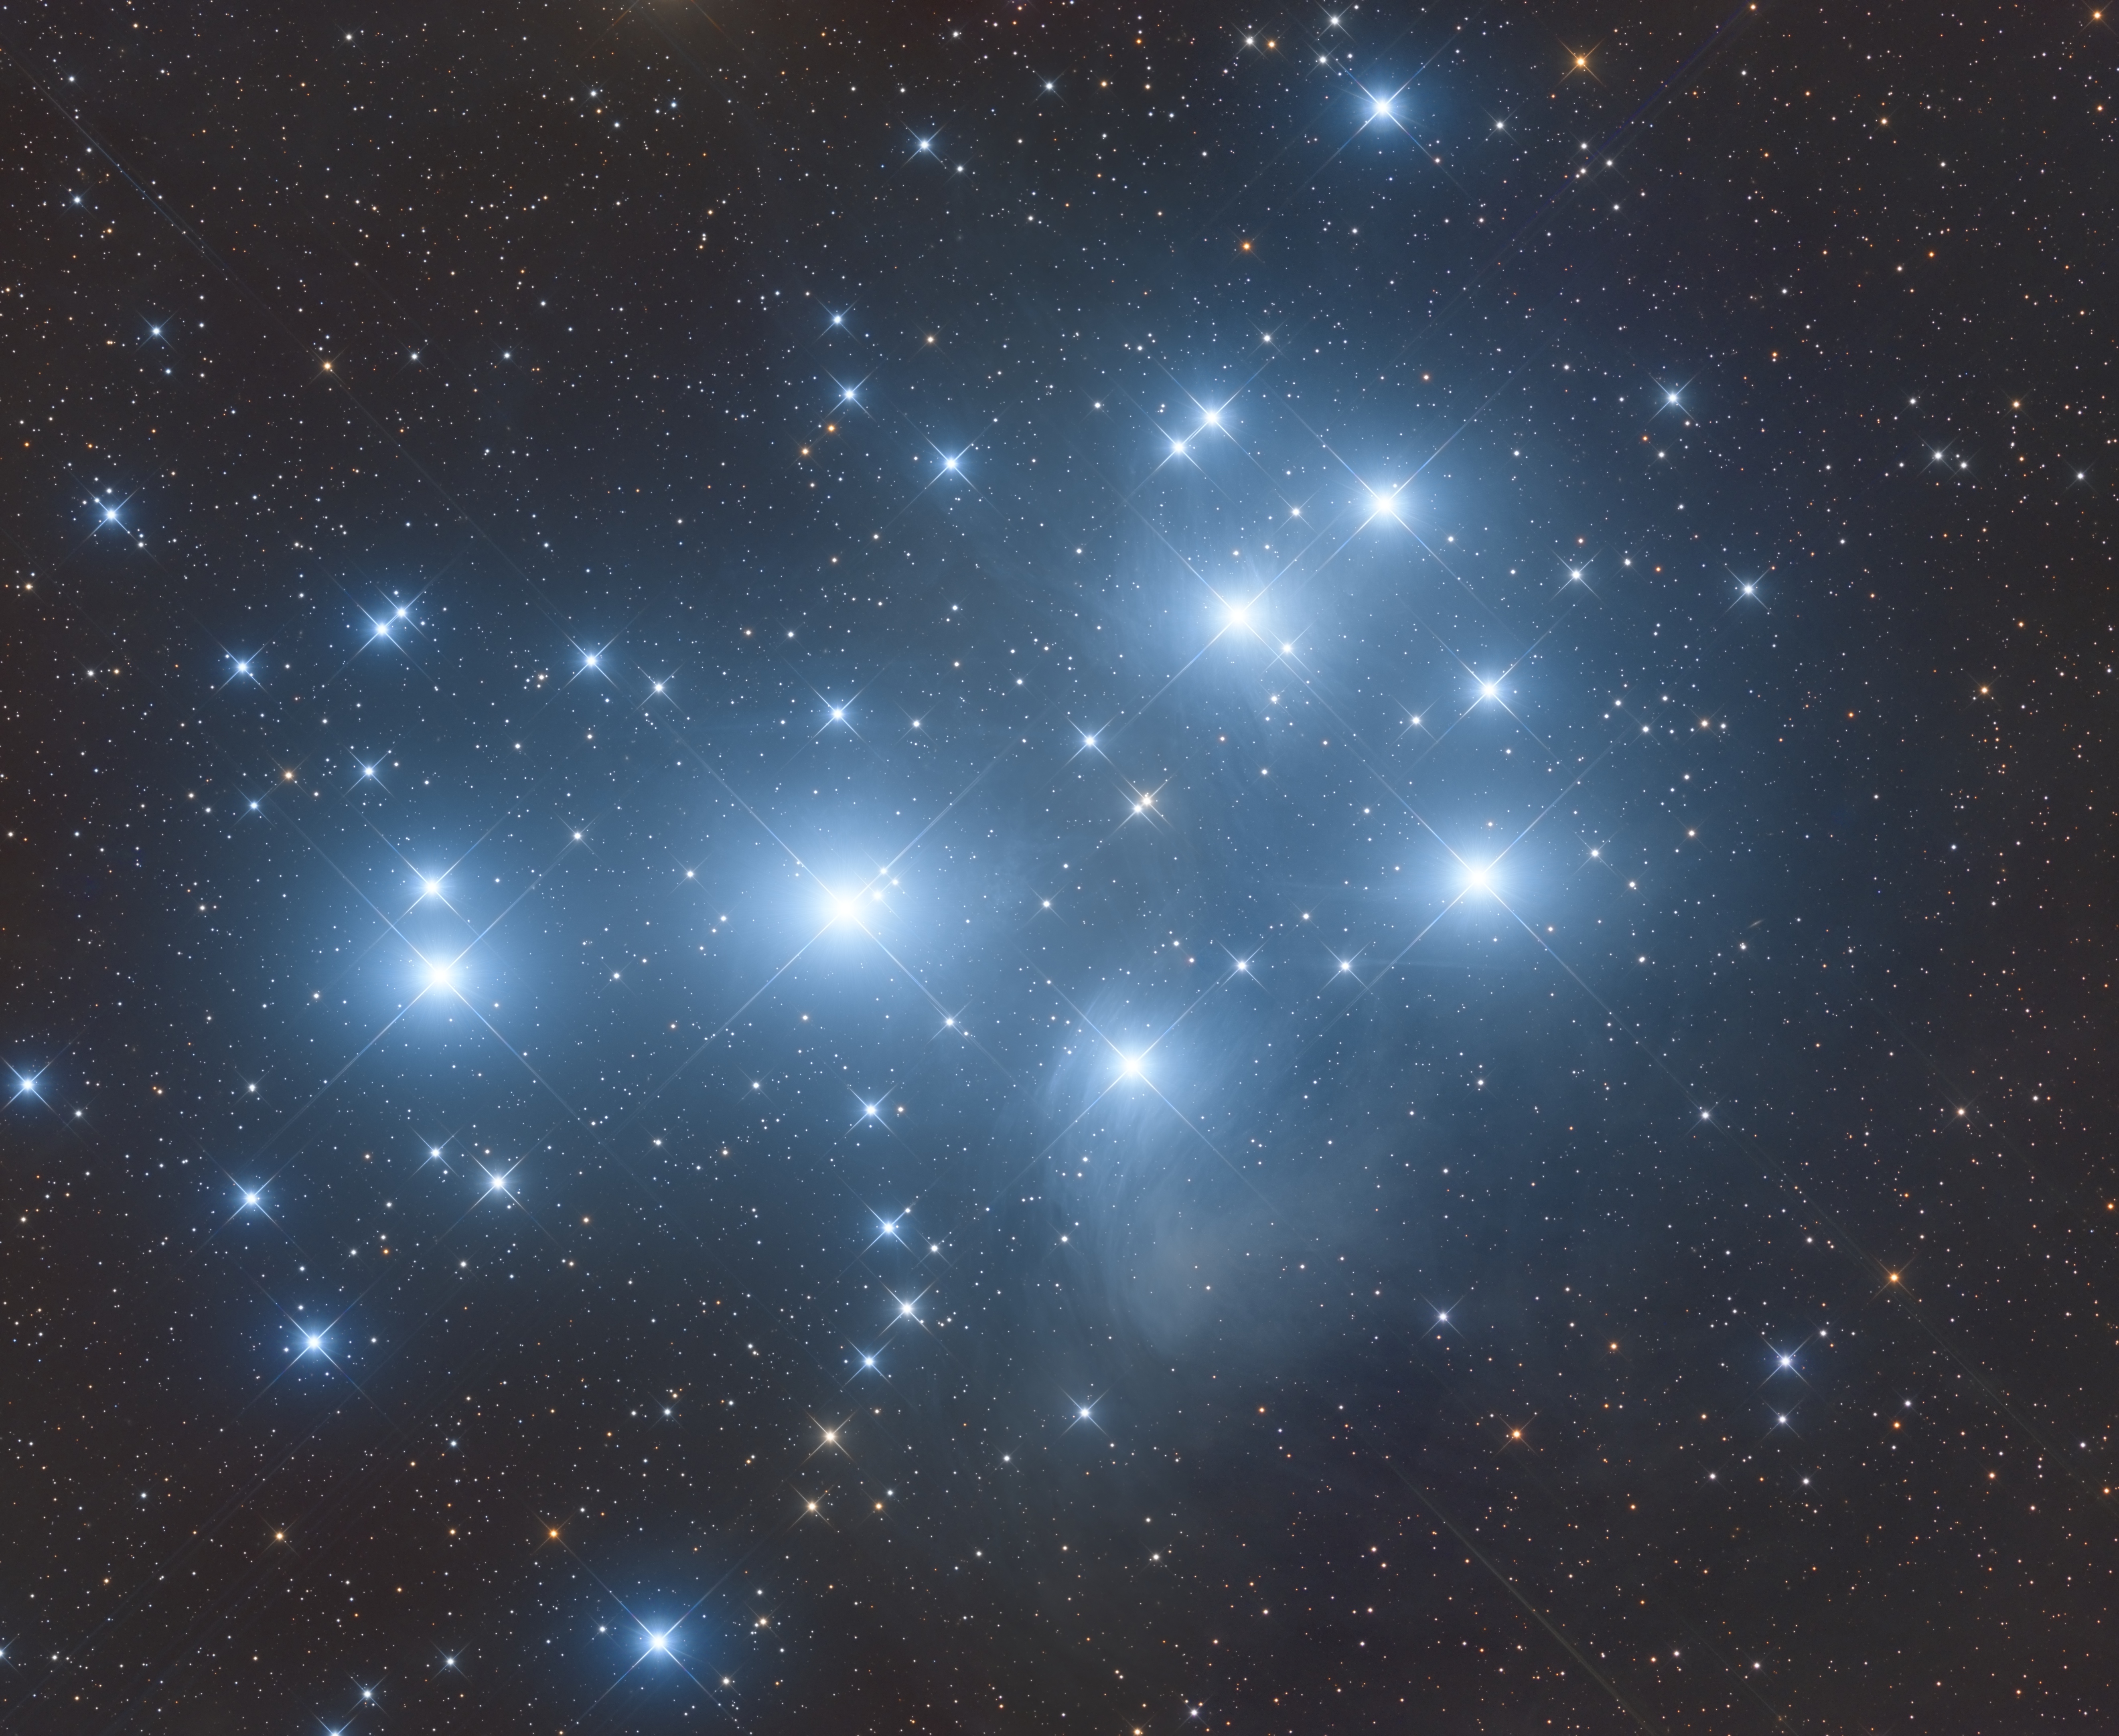 Twinkling Stars Skywatcher Snaps Stunning View Of Pleiades Star Cluster Space